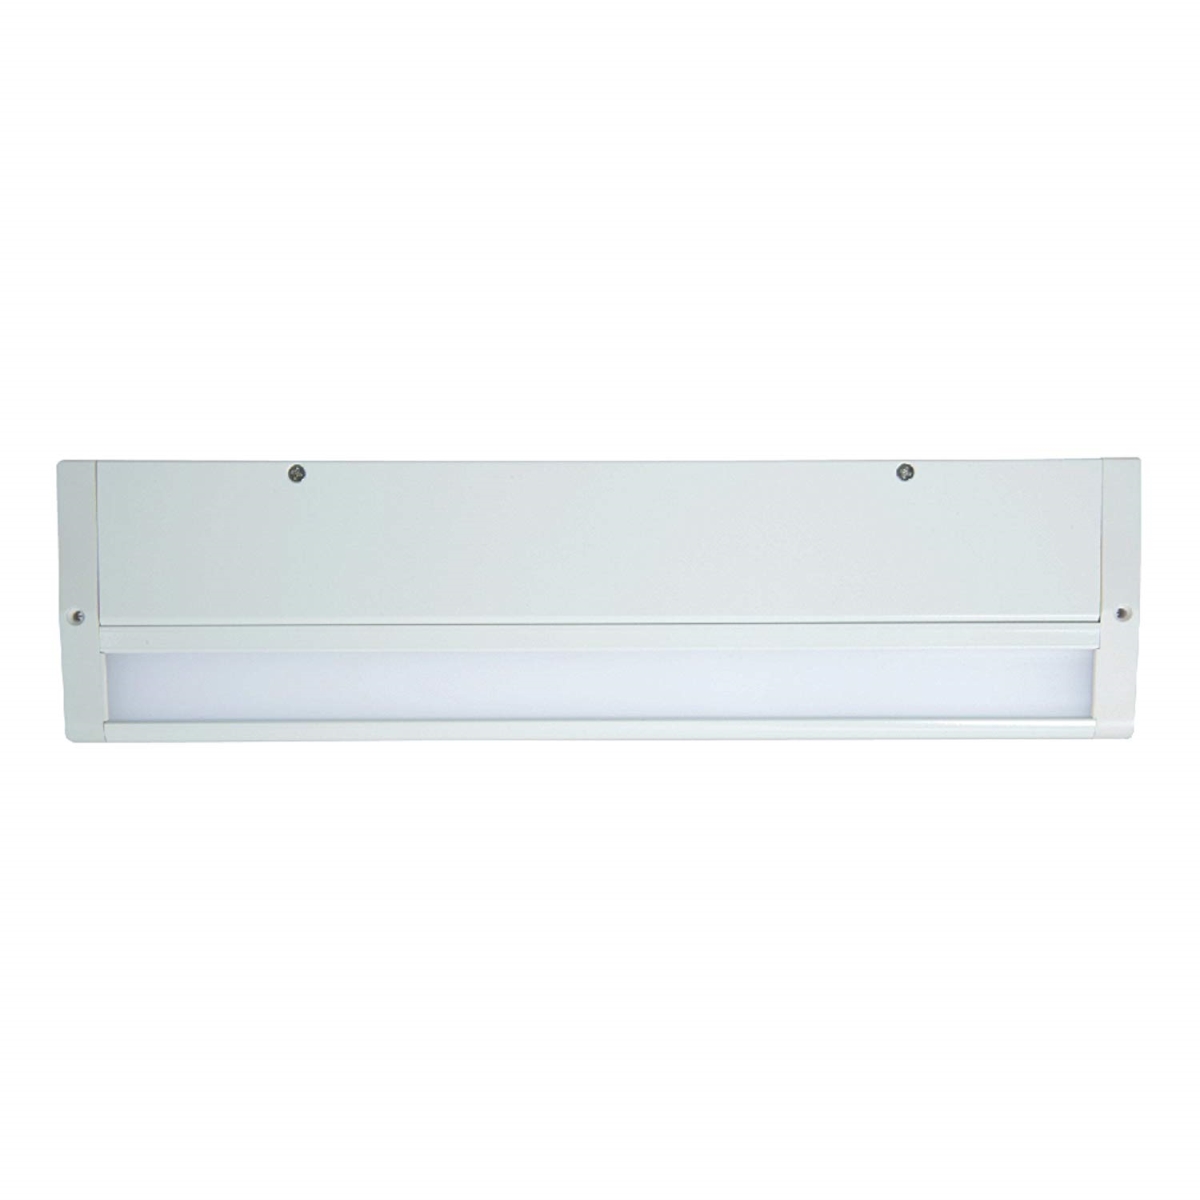 Hu1018d930p Halo Hu10 Led Undercabinet, White - 18 In.